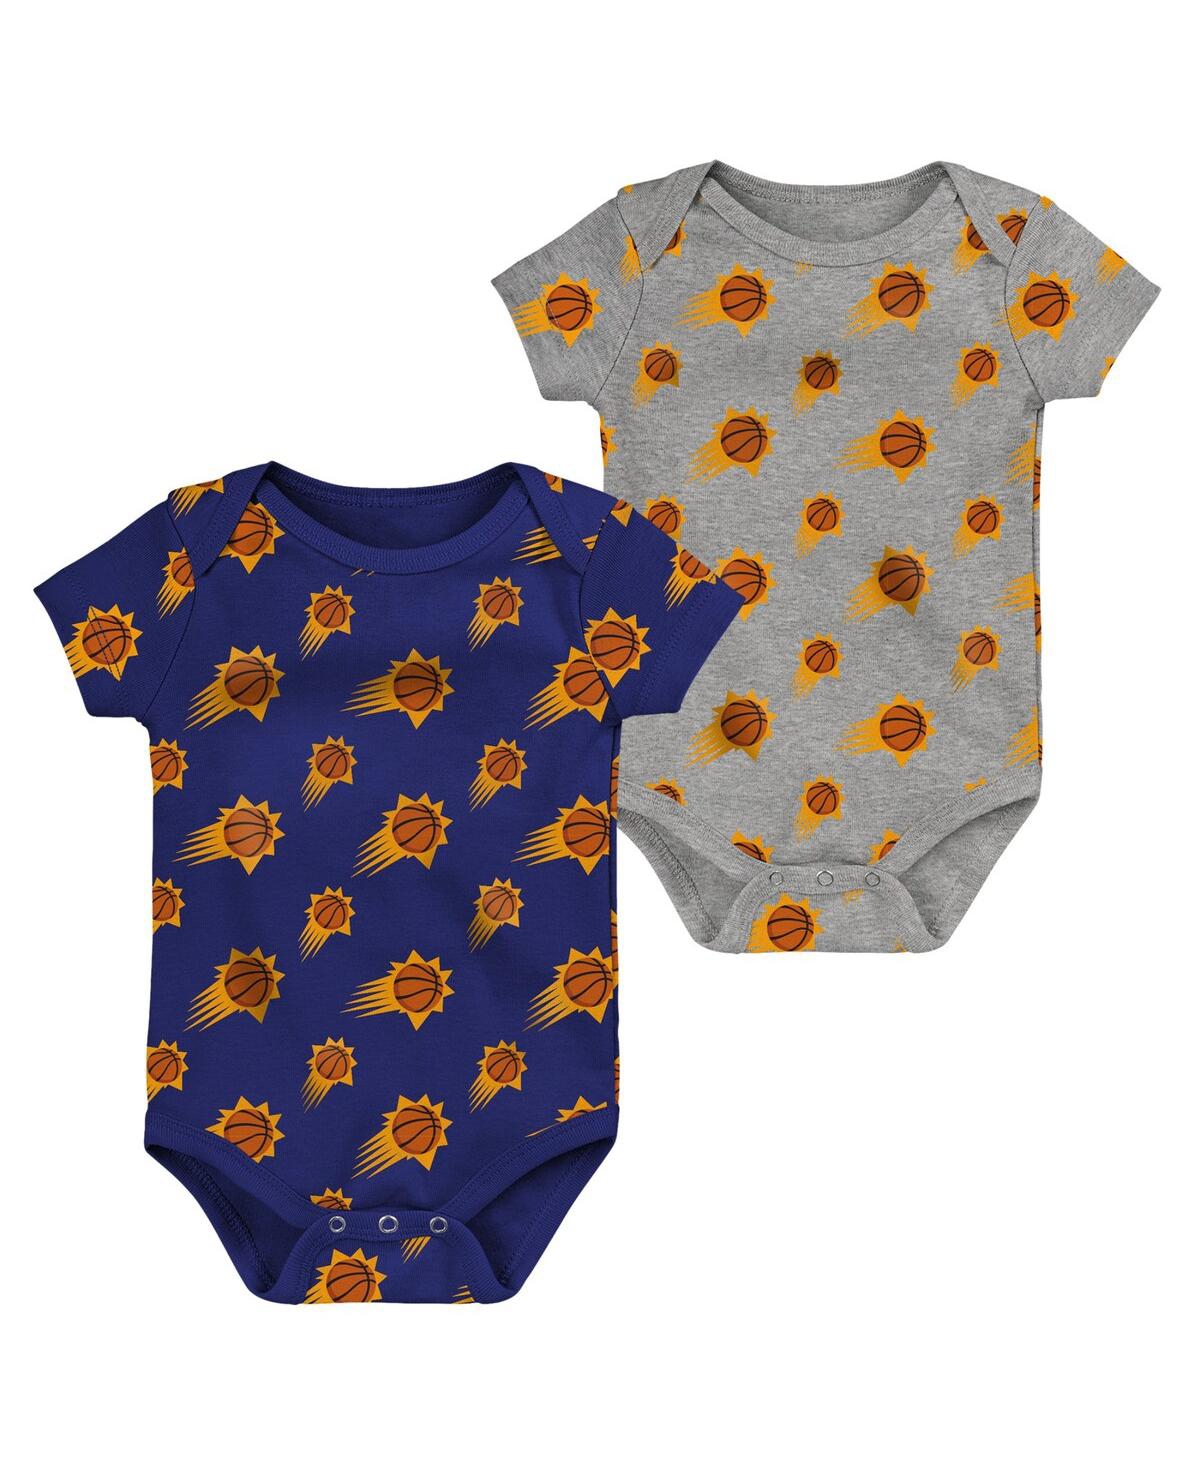 Outerstuff Babies' Newborn And Infant Boys And Girls Purple, Gray Phoenix Suns Two-pack Double Up Bodysuit Set In Purple,gray